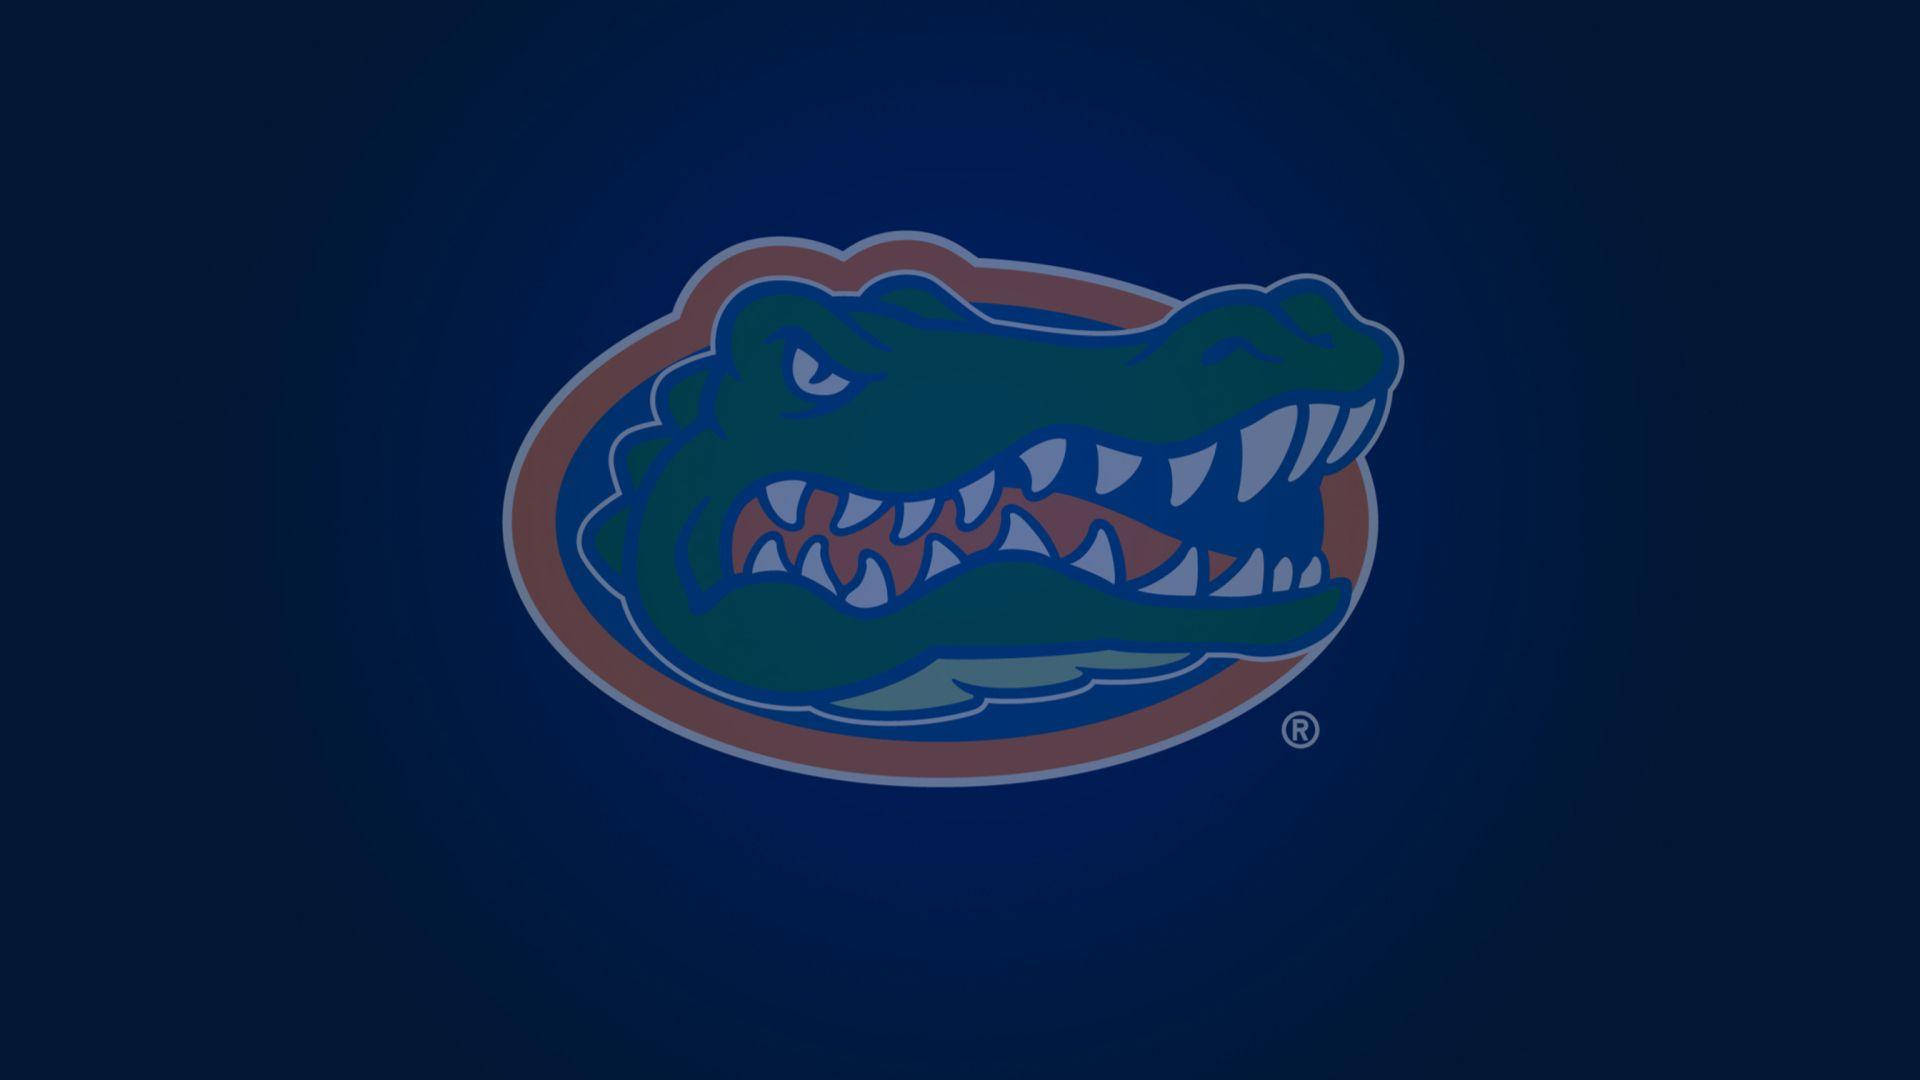 Top 999+ University Of Florida Wallpapers Full HD, 4K✅Free to Use